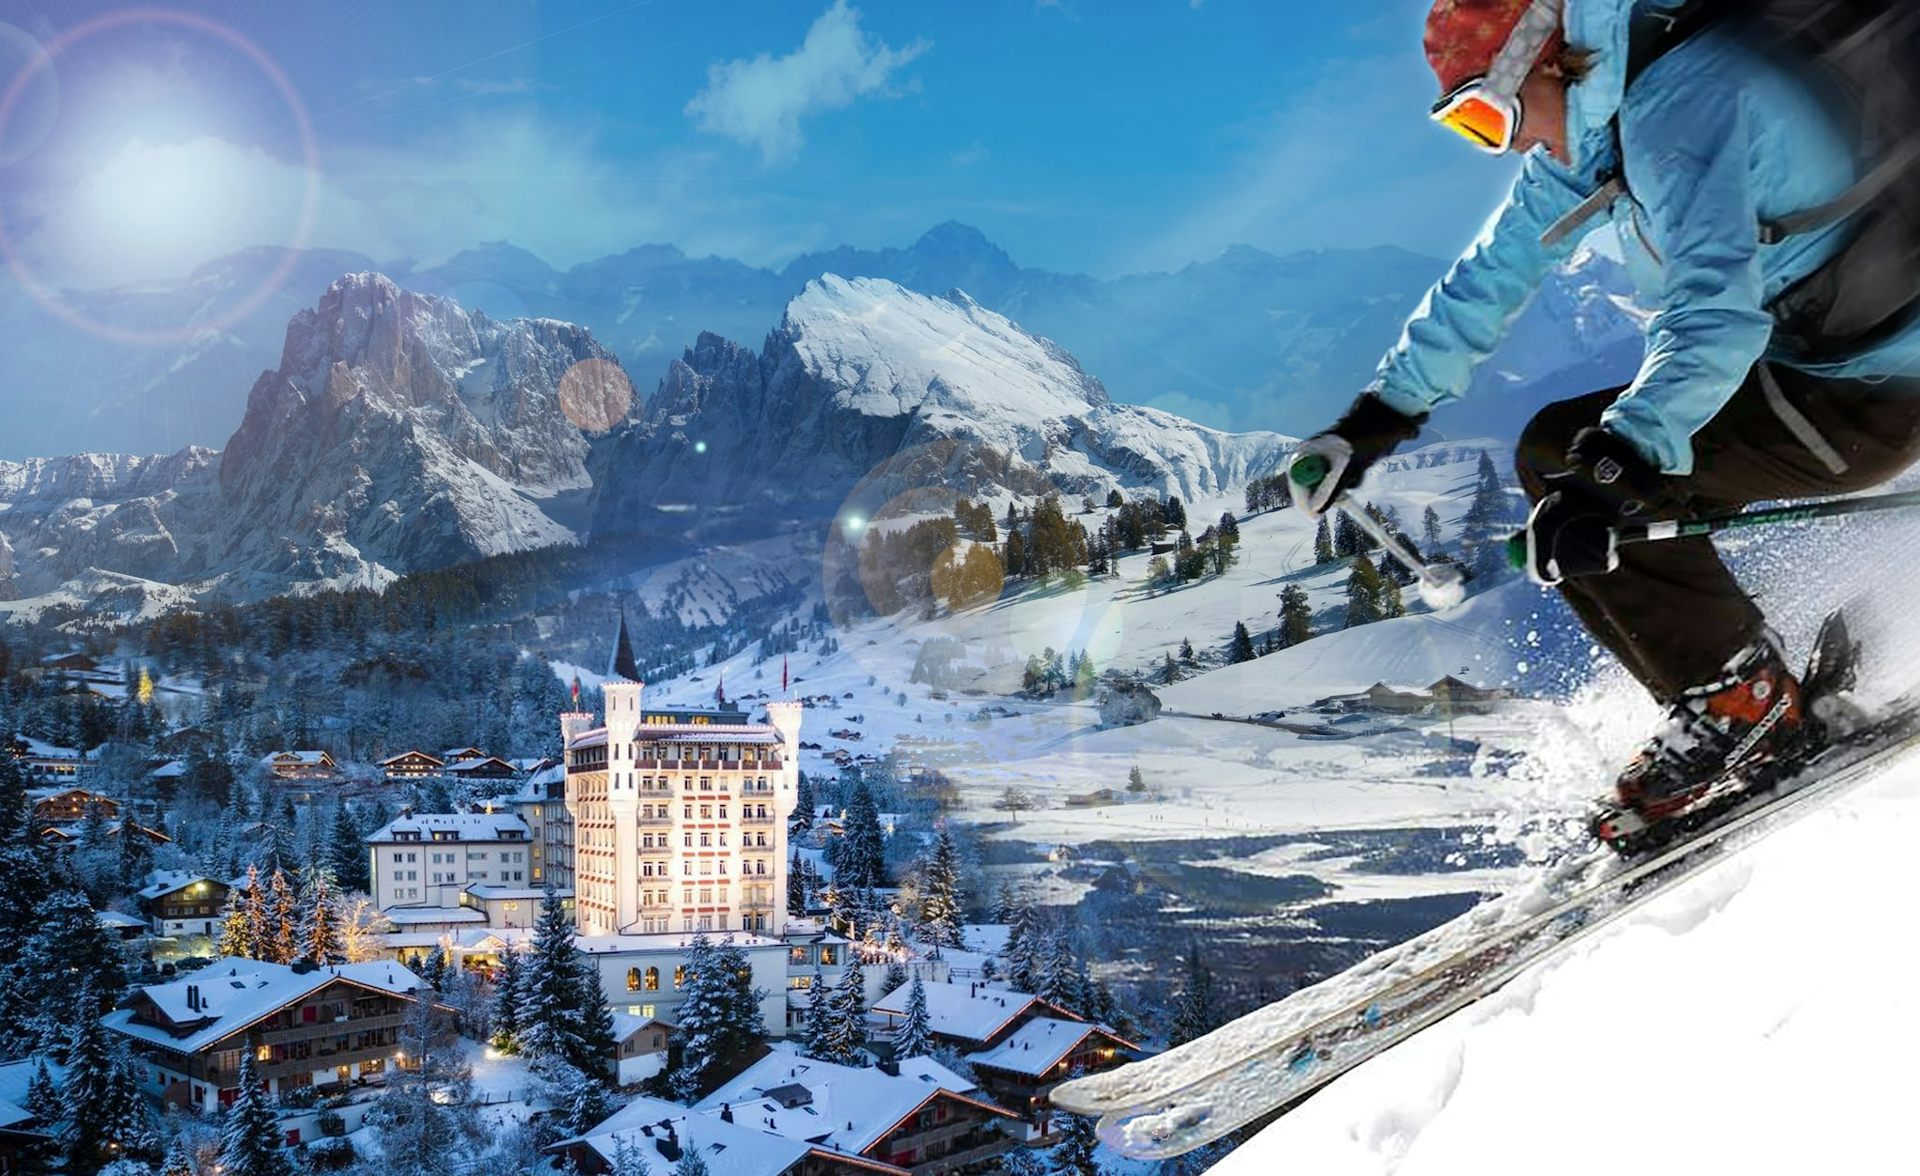 Oh My Gstaad – A Guide To The World’s Most Luxurious Ski Resort